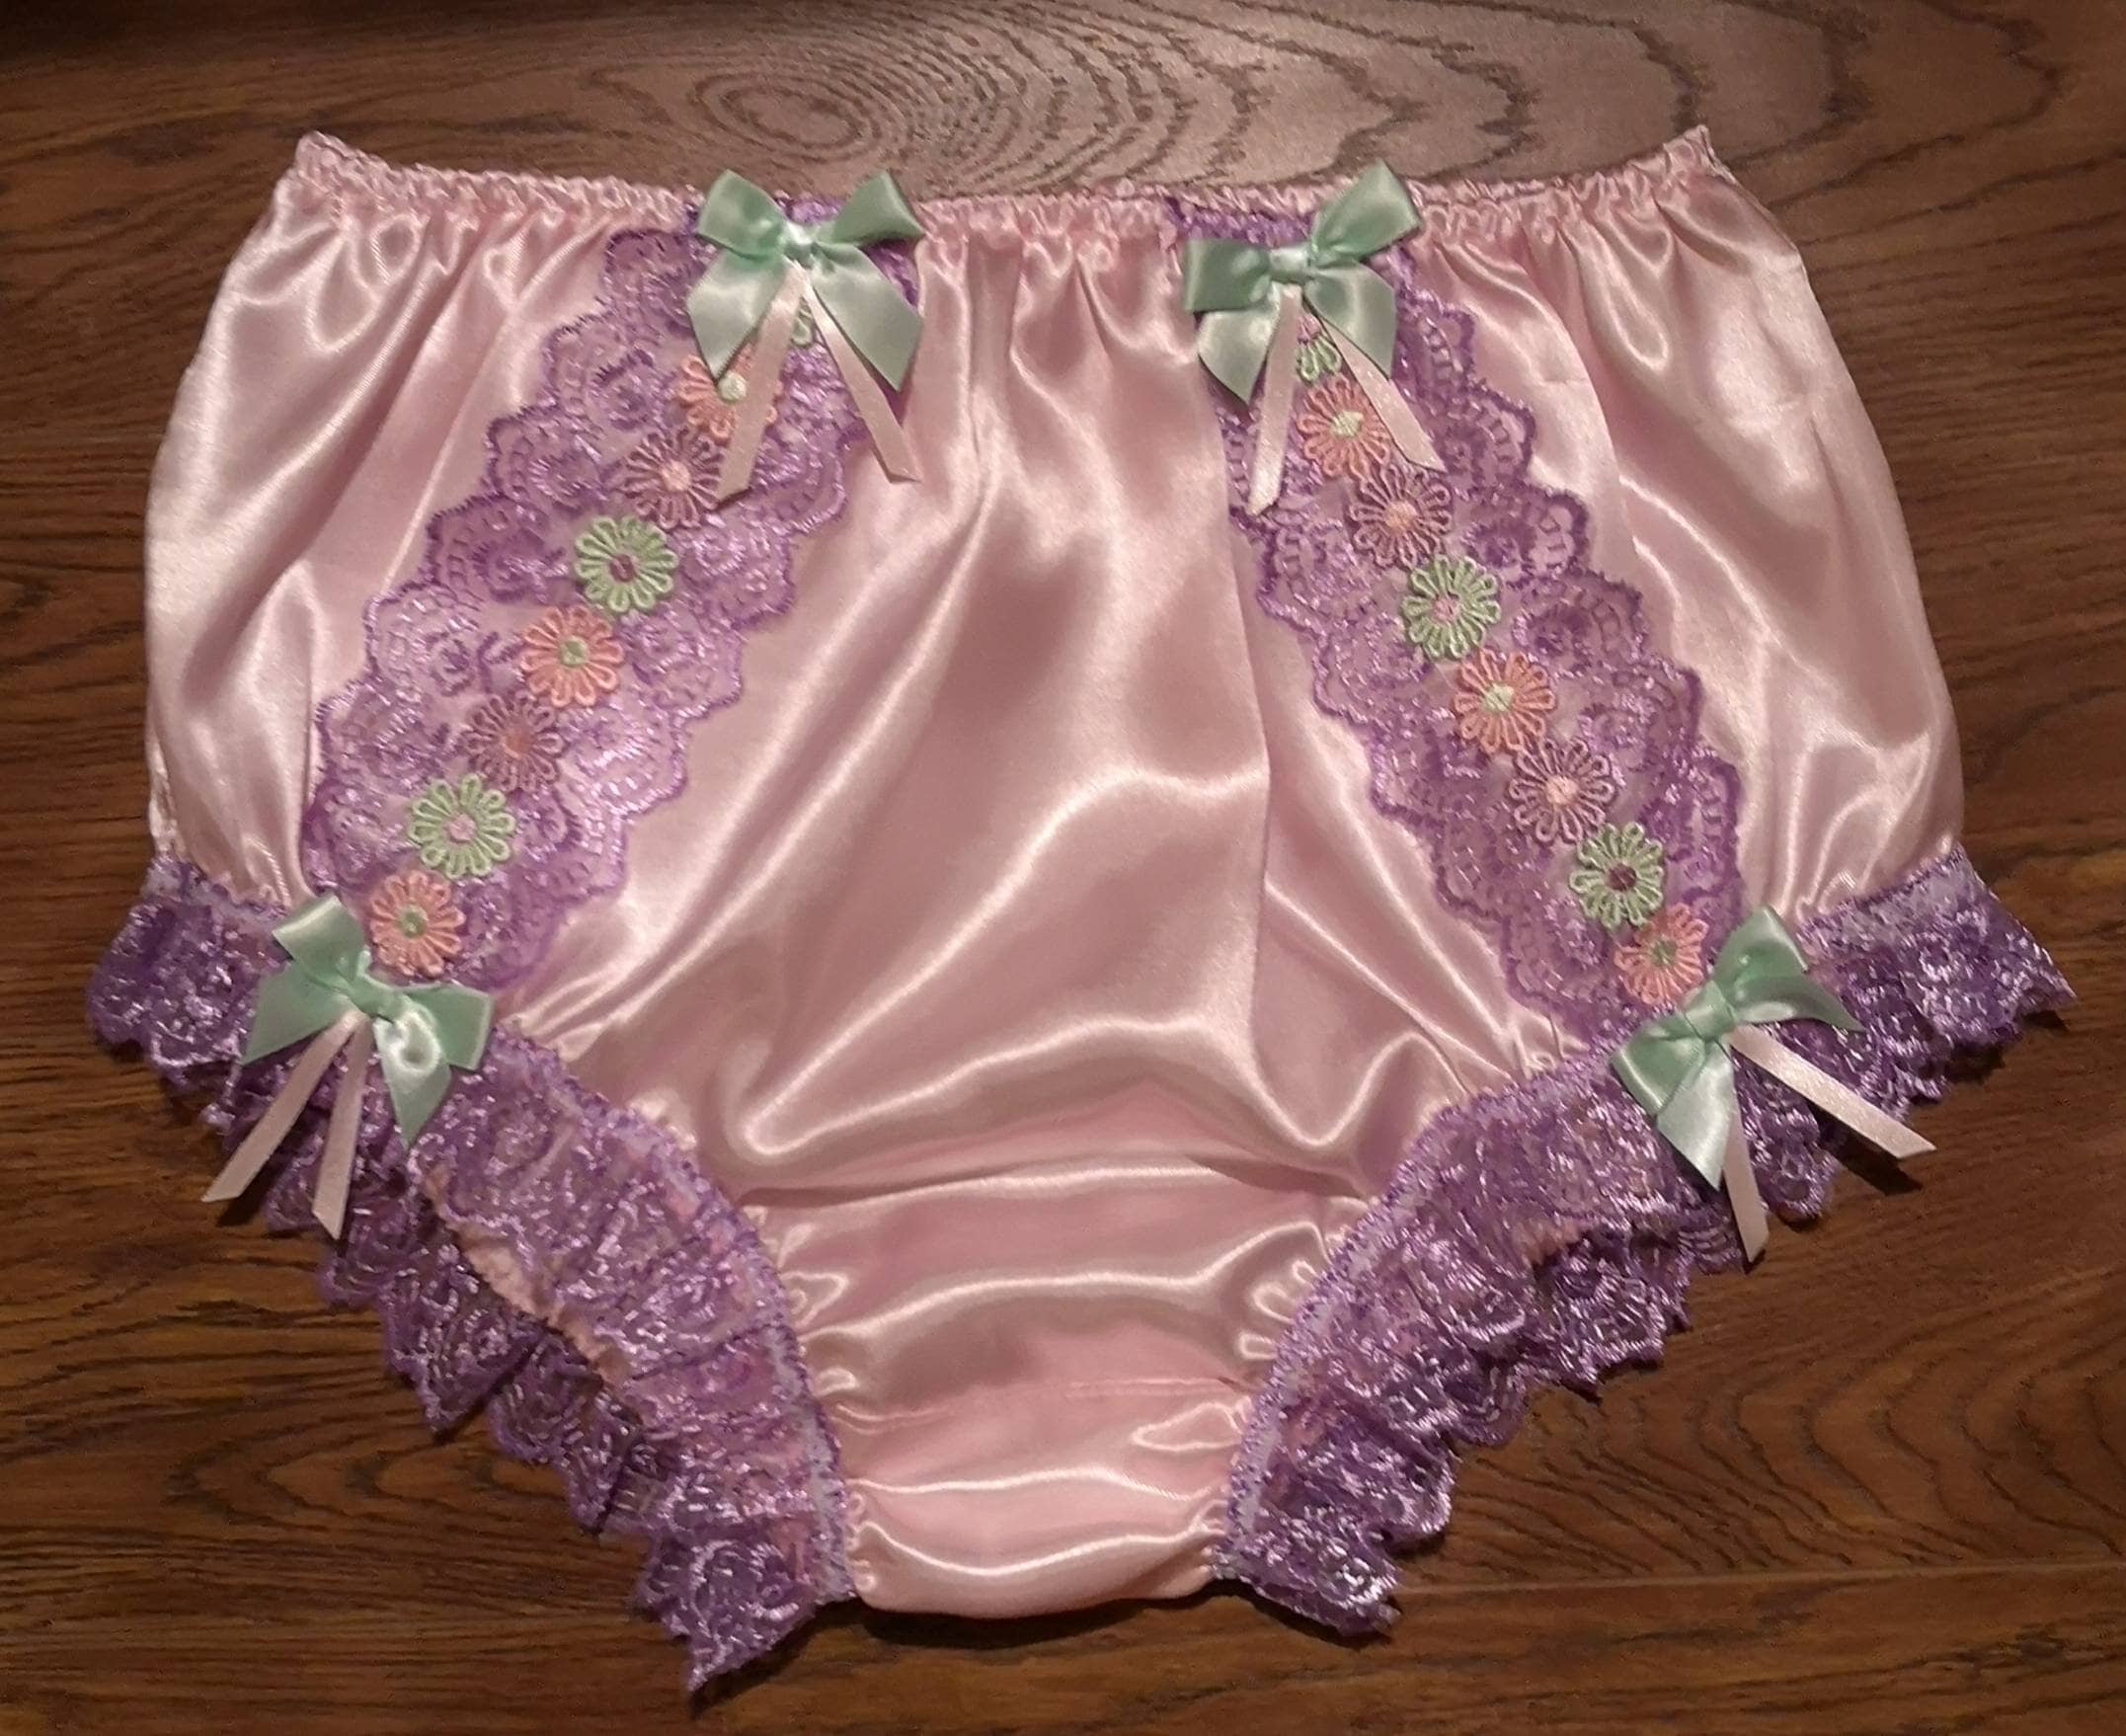 Baby Pink Full Style Satin Panties-silky Sofy Sissy Knickers  lacedaisies&bows Made to Order Medium up to XXL 